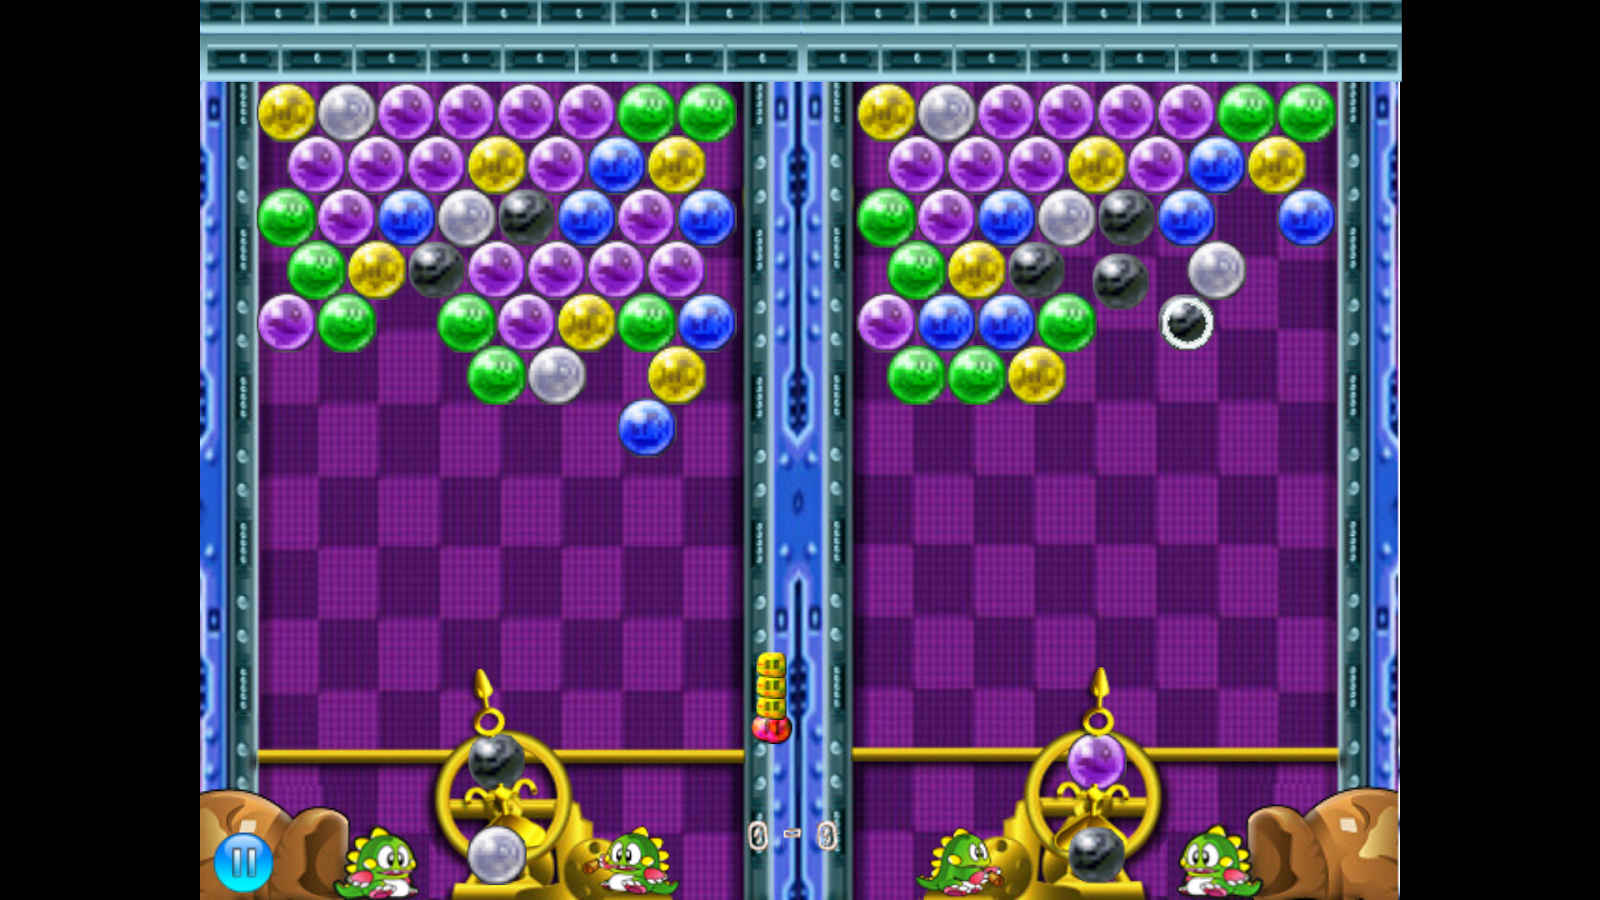 Puzzle Bobble PC Game 2 player